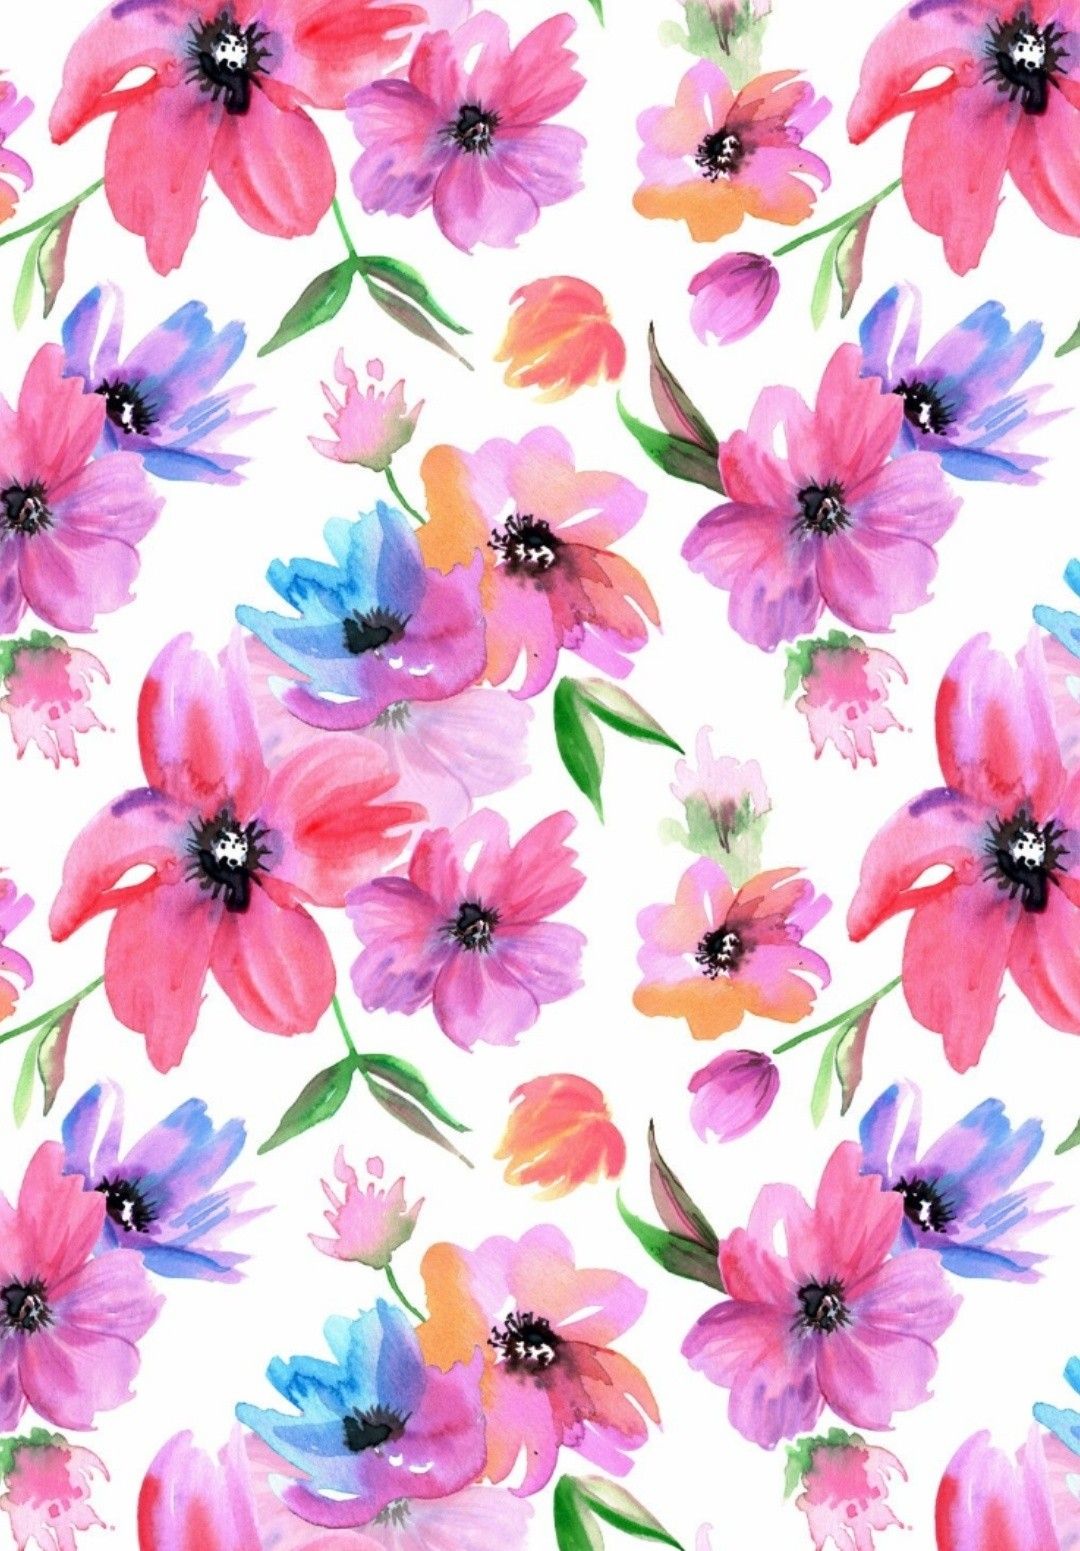 Watercolor Seamless Patterns With Pink And Purple Flowers In